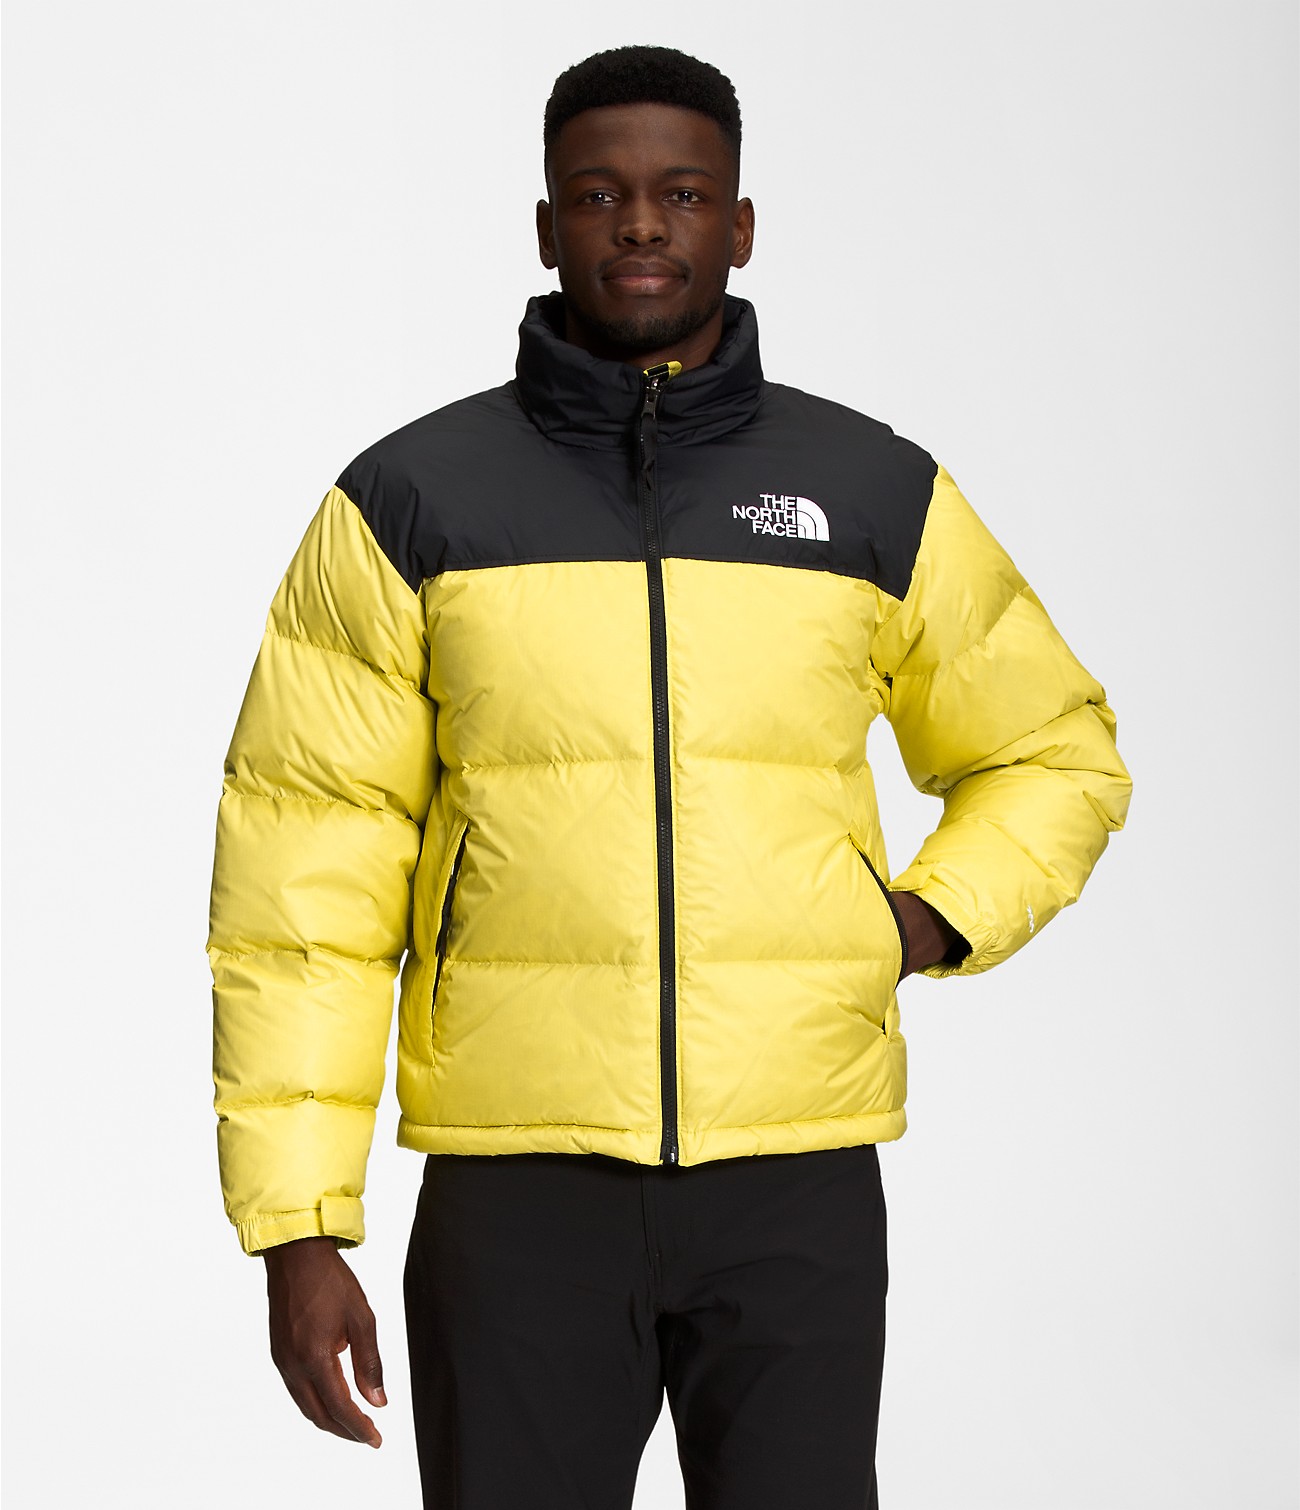 Unlock Wilderness' choice in the Superdry Vs North Face comparison, the 1996 Retro Nuptse Jacket by The North Face